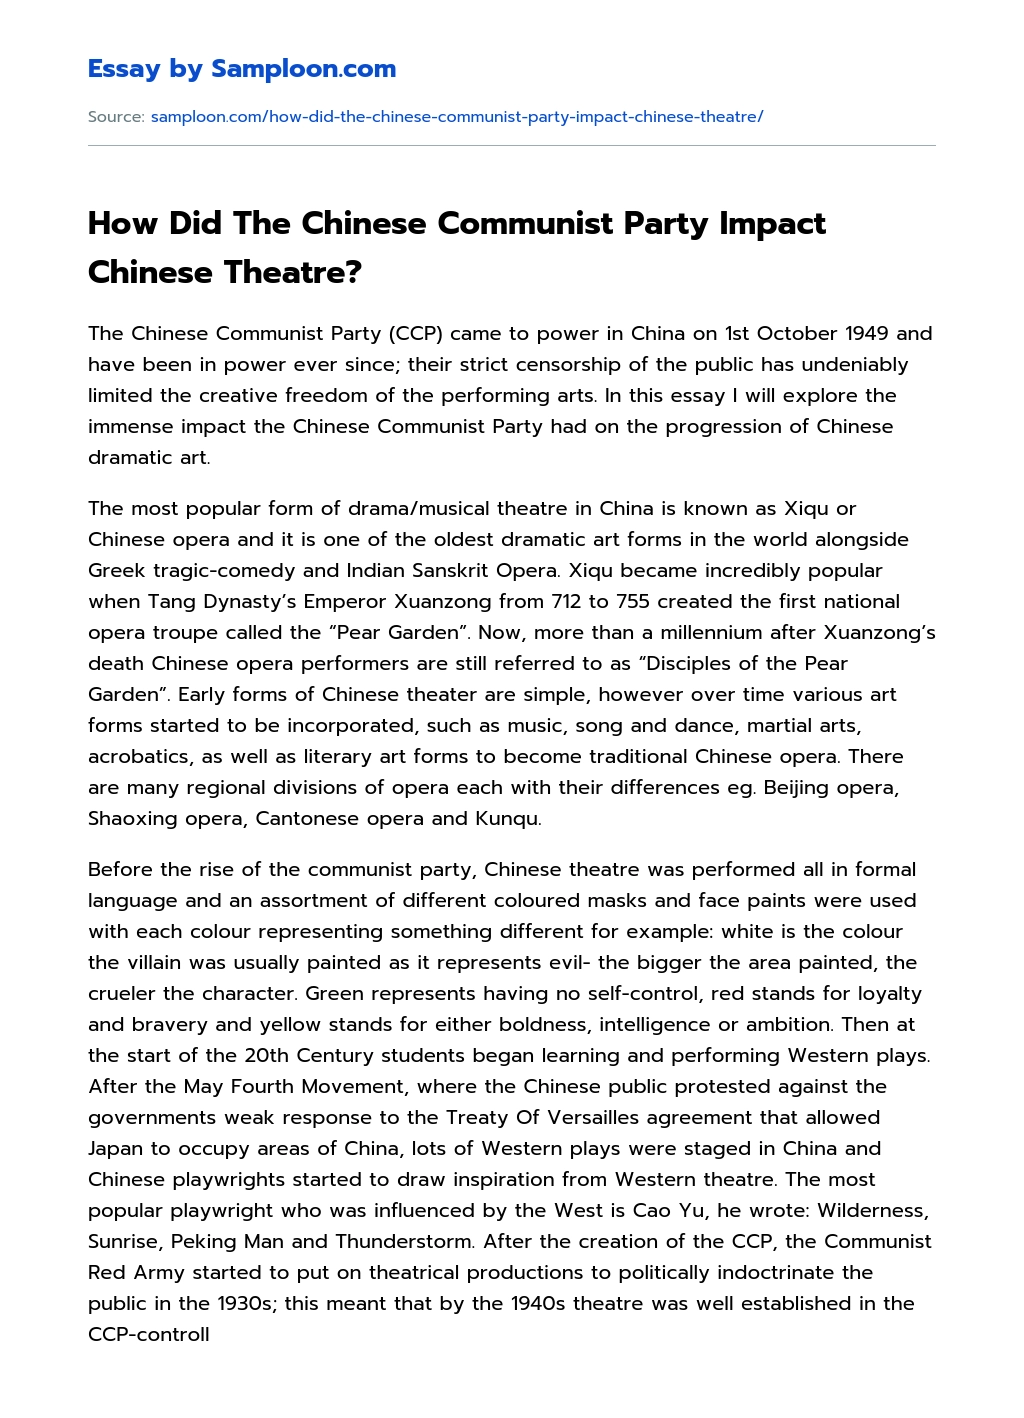 How Did The Chinese Communist Party Impact Chinese Theatre? essay